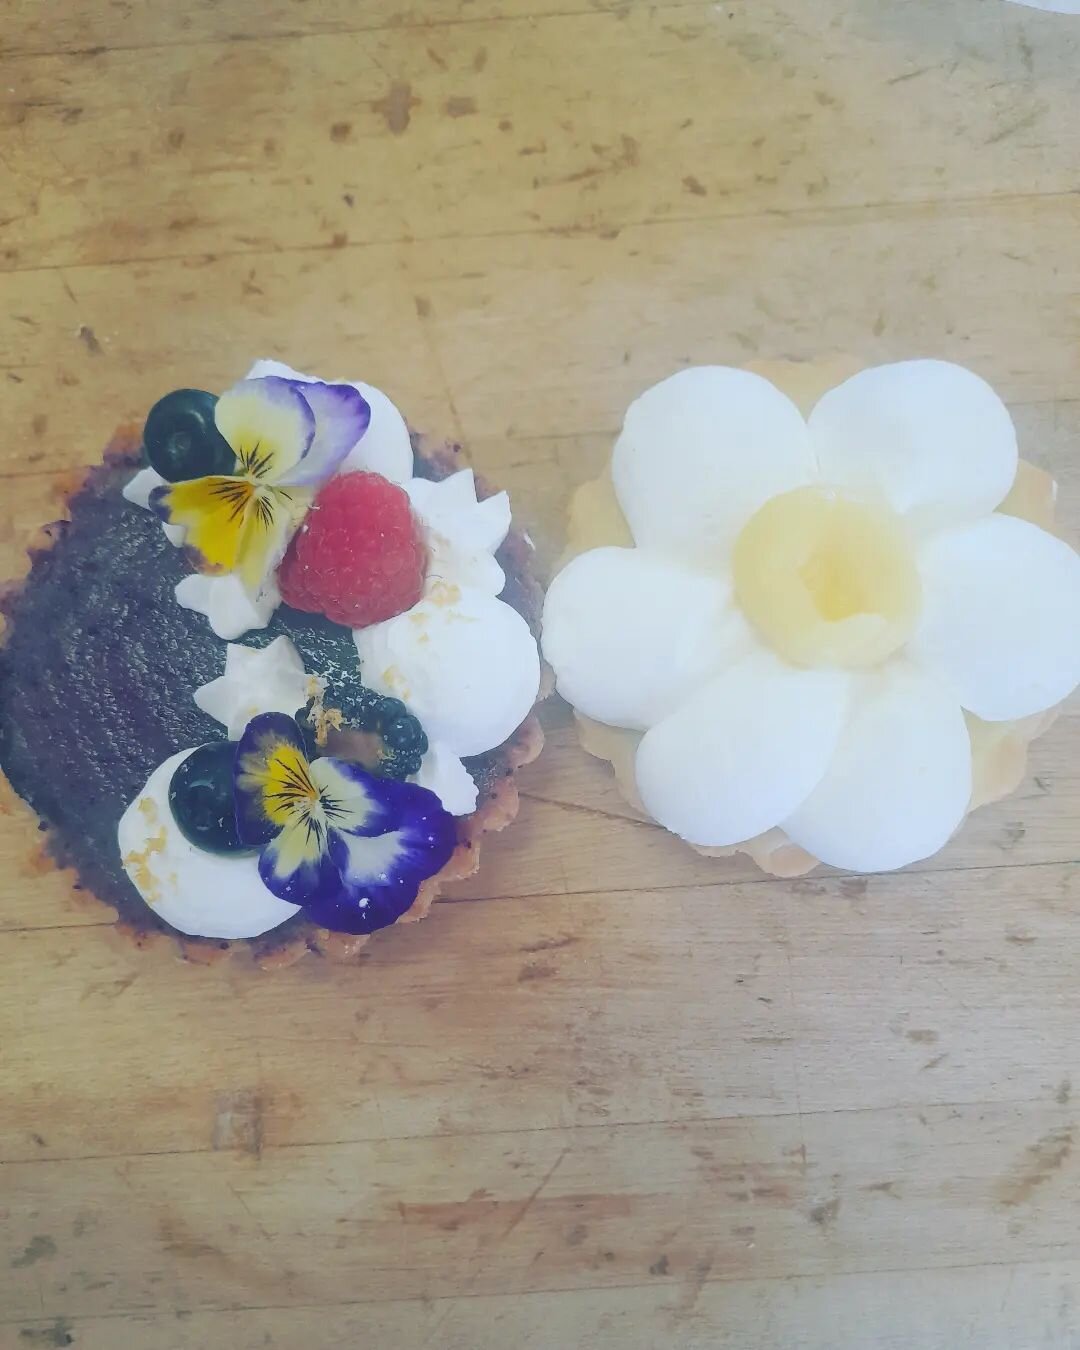 Good morning! 
We have two new tarts to add to our collection!
Mixed berry frangipan tart- frangipan topped off with a Mixed berry custard, whipped cream, fresh fruit and edible flowers!
Summer citrus tart- lemon and orange custard topped off with fr